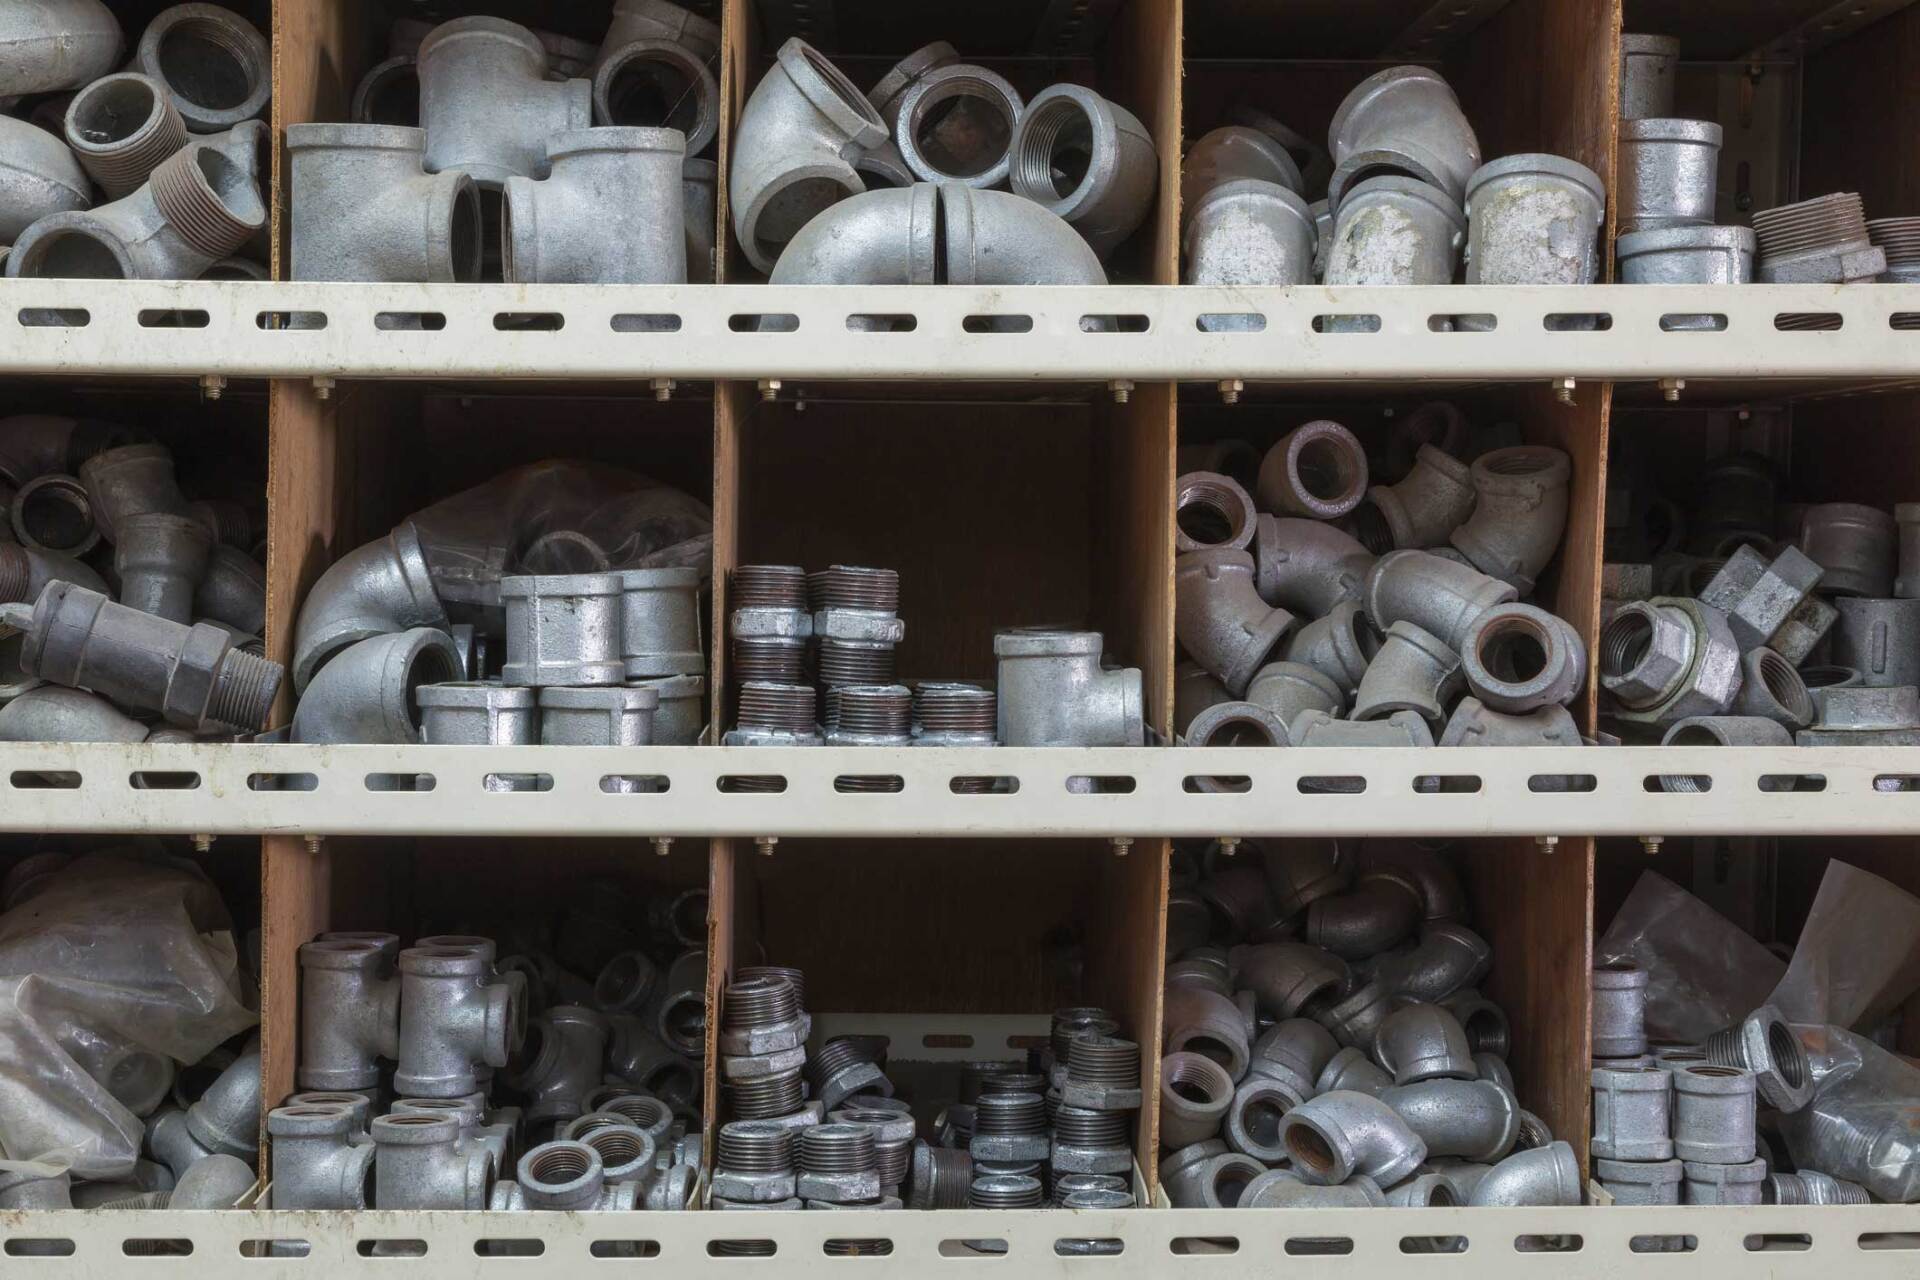 Galvanized water pipe connectors | Central Coast, NSW | Westy’s Place